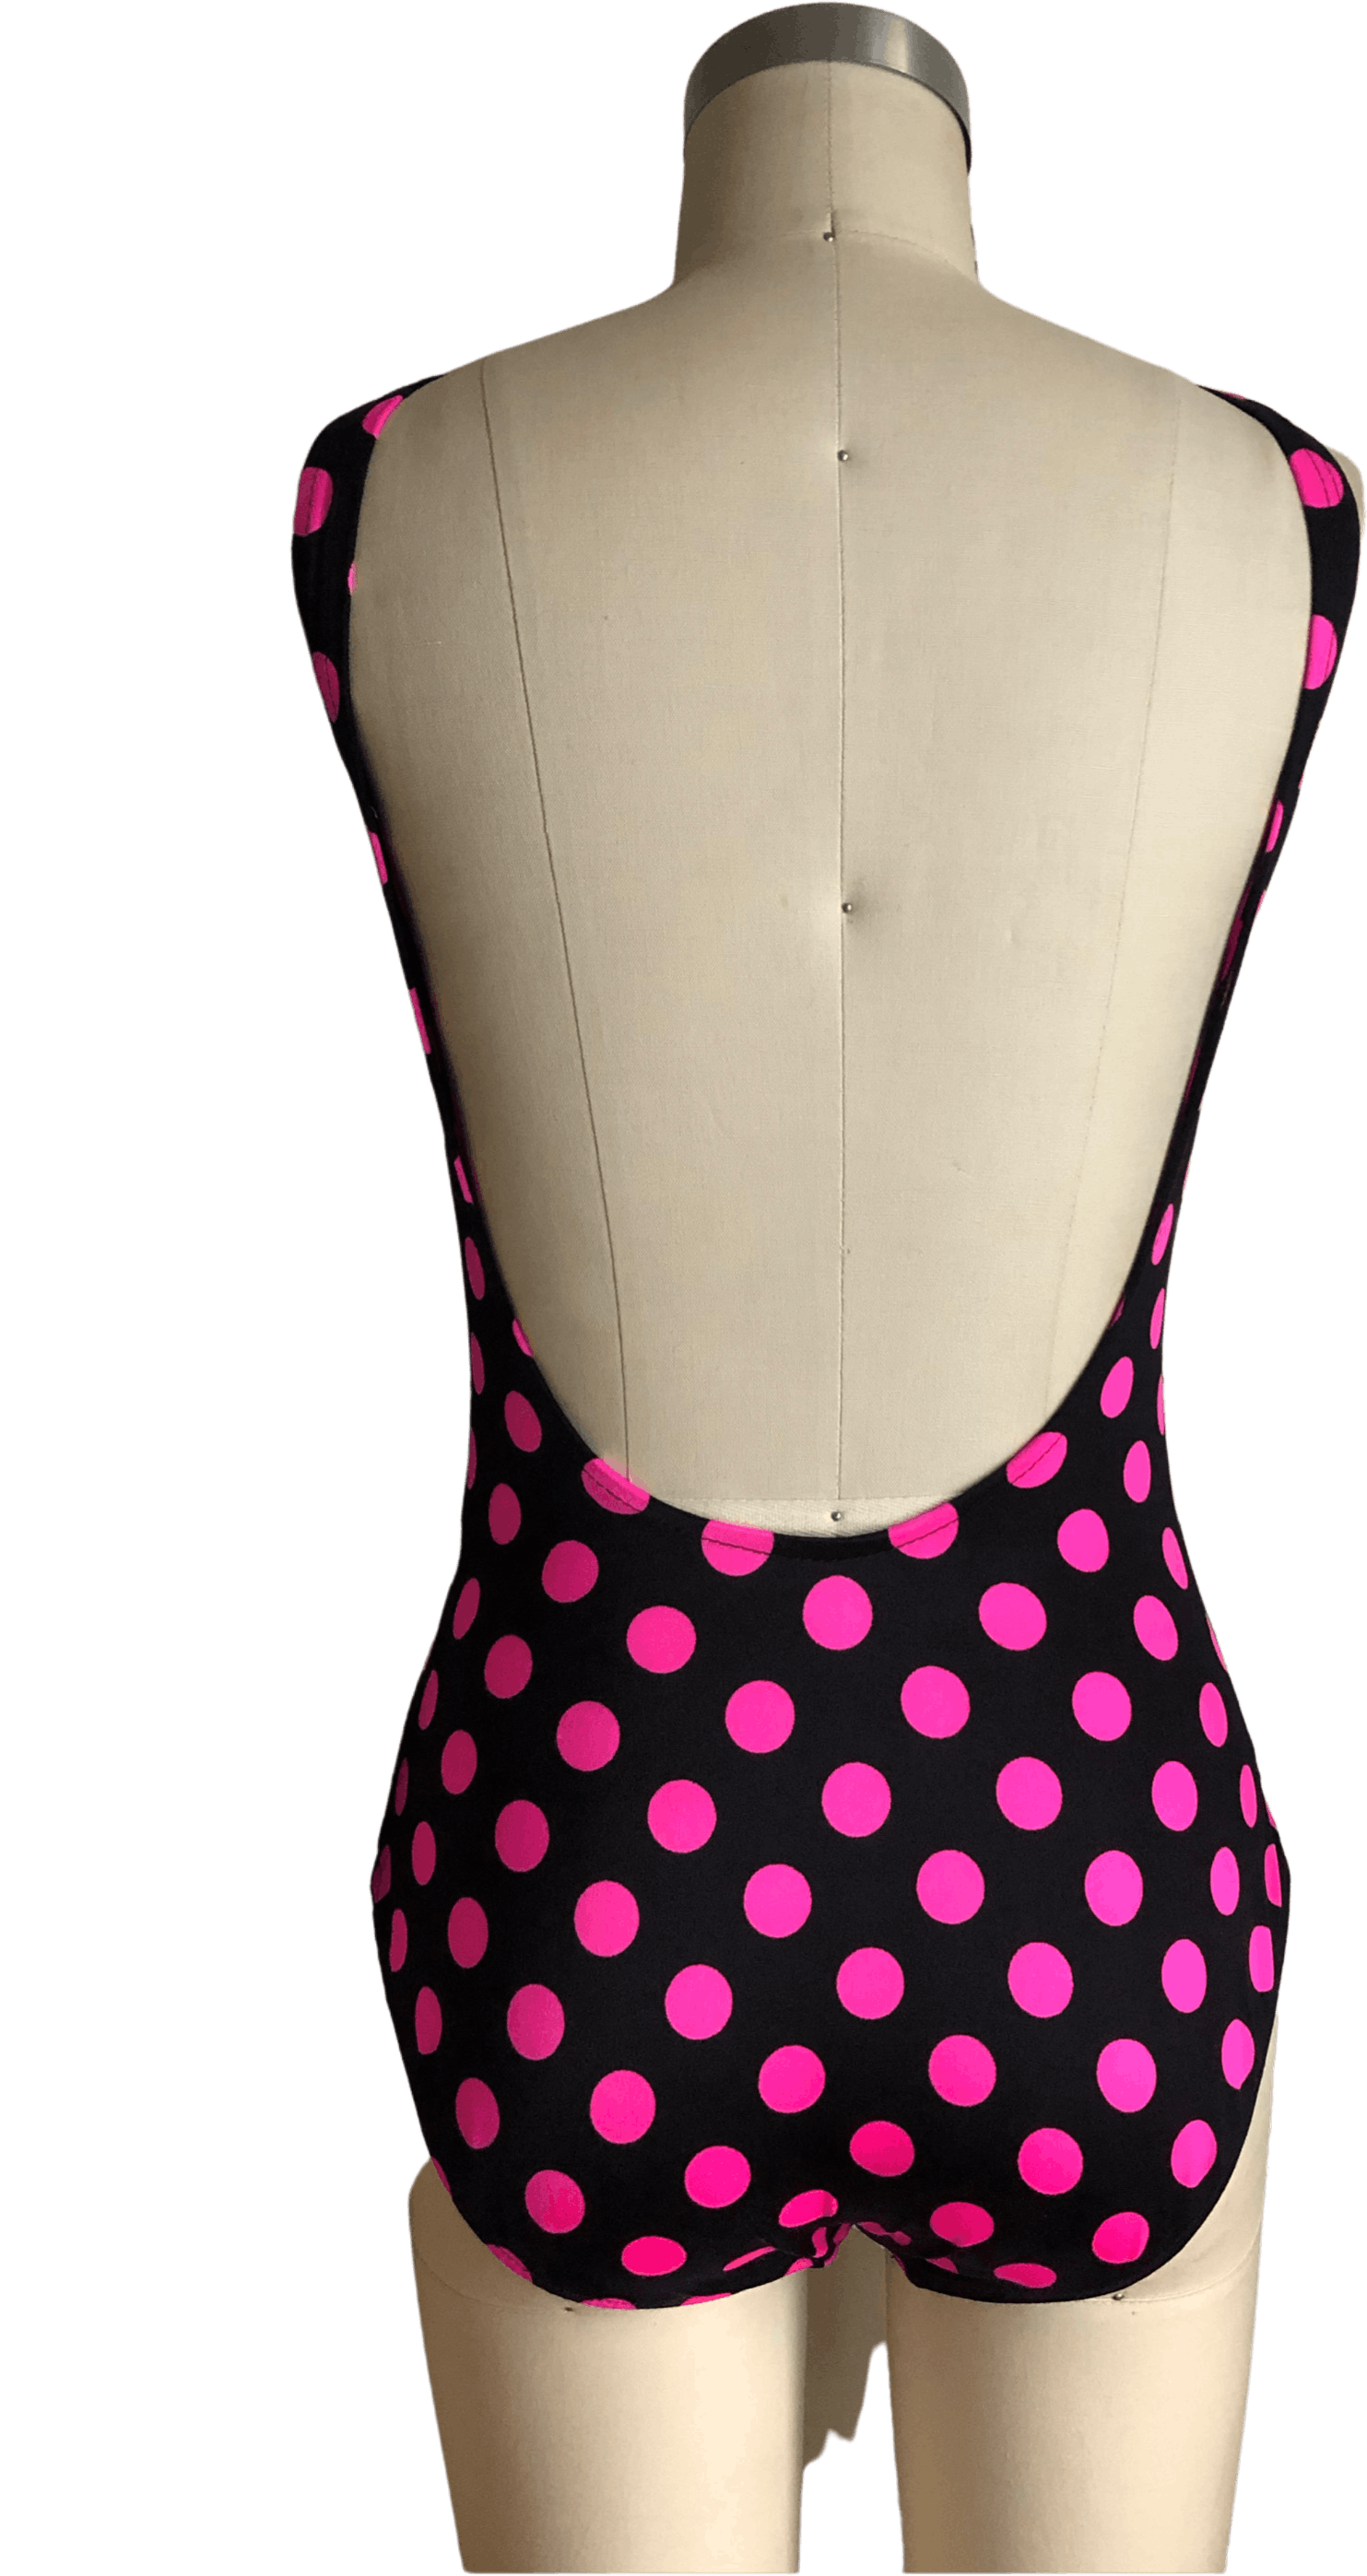 Vintage 80’s Black and Pink Polka Dot Swimsuit by Catalina | Shop THRILLING